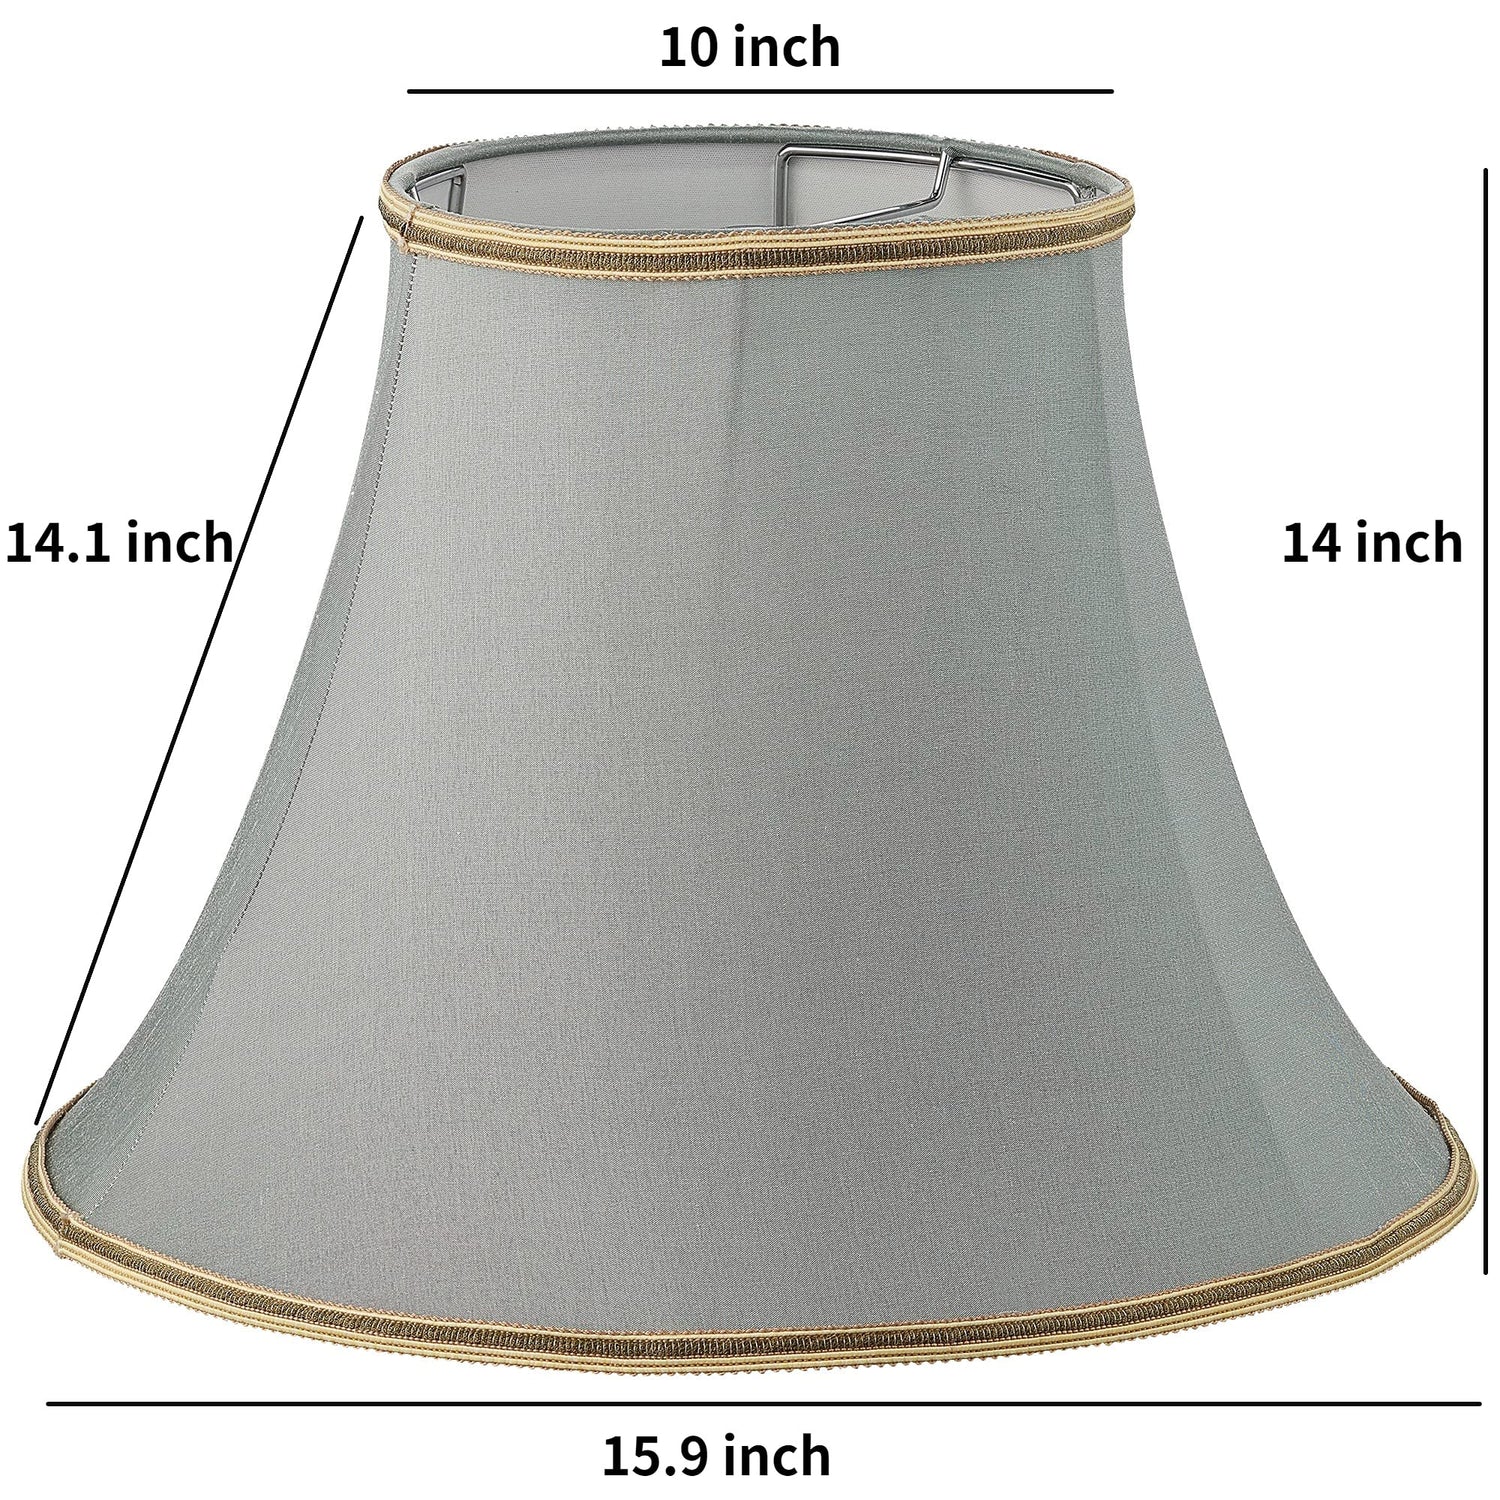 Refresh the look of your favorite lamp! Carro Home lamp shades bring a new and sophisticated look to your table or floor lamps. This replacement spider/harp lamp shade has an unique collapsible construction, easy to store and easy to assemble. Carro Home lampshades are made of high quality fabric and materials, and will add a stylish design flair to your home. 